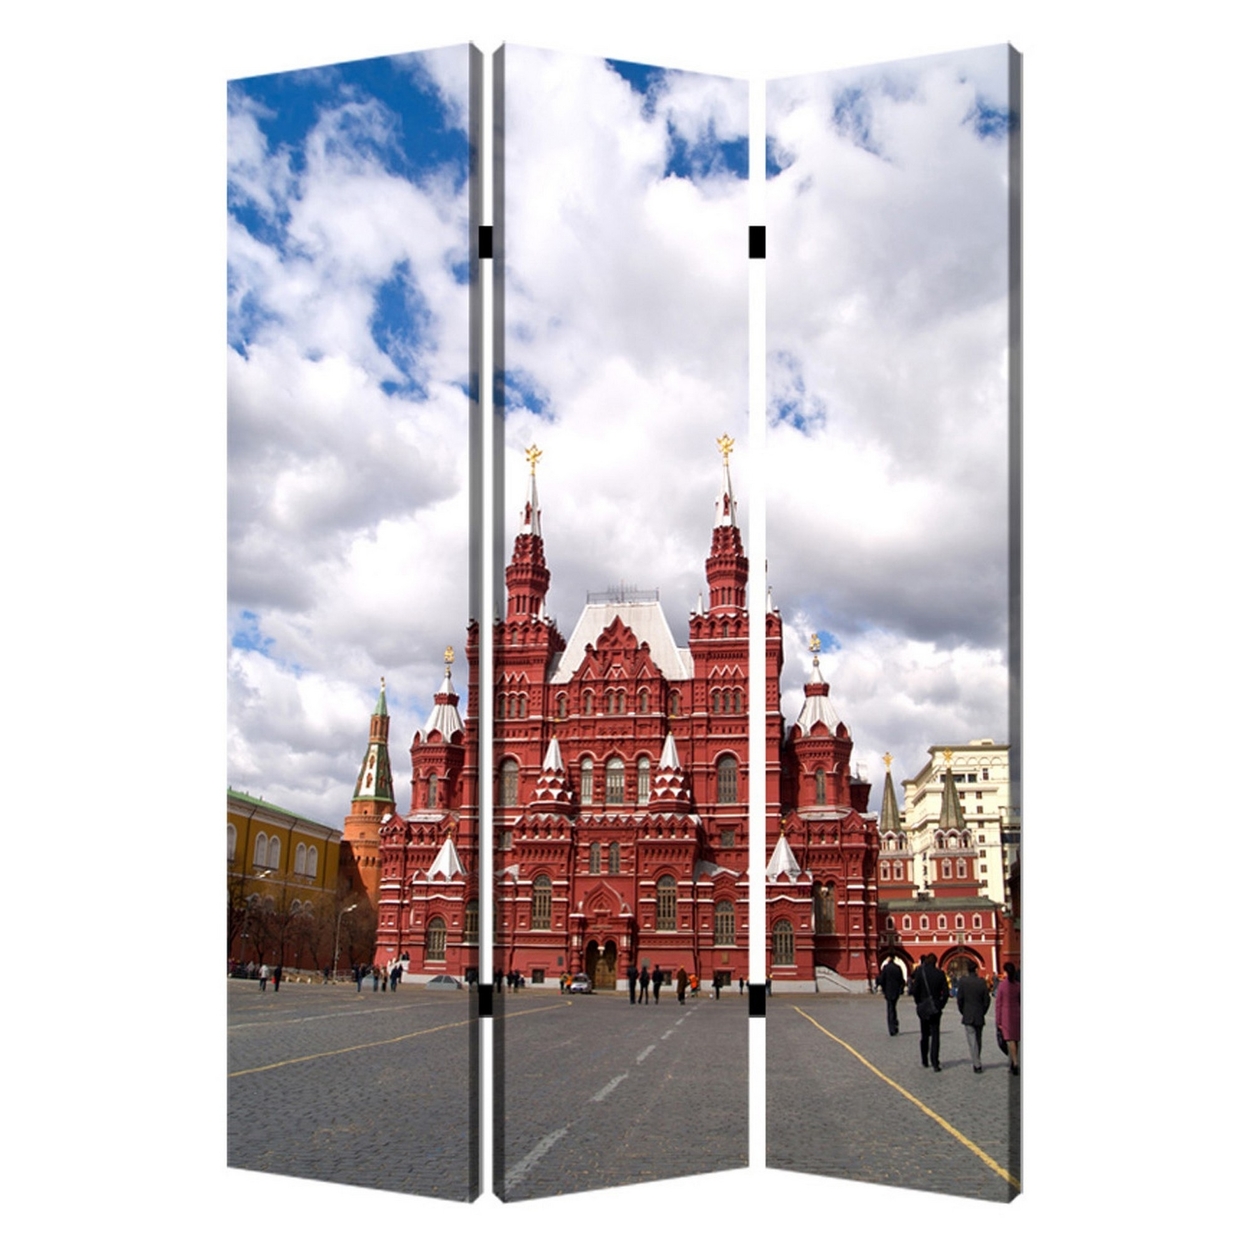 Russian Tower Print Foldable Canvas Screen With 3 Panels, Multicolor- Saltoro Sherpi